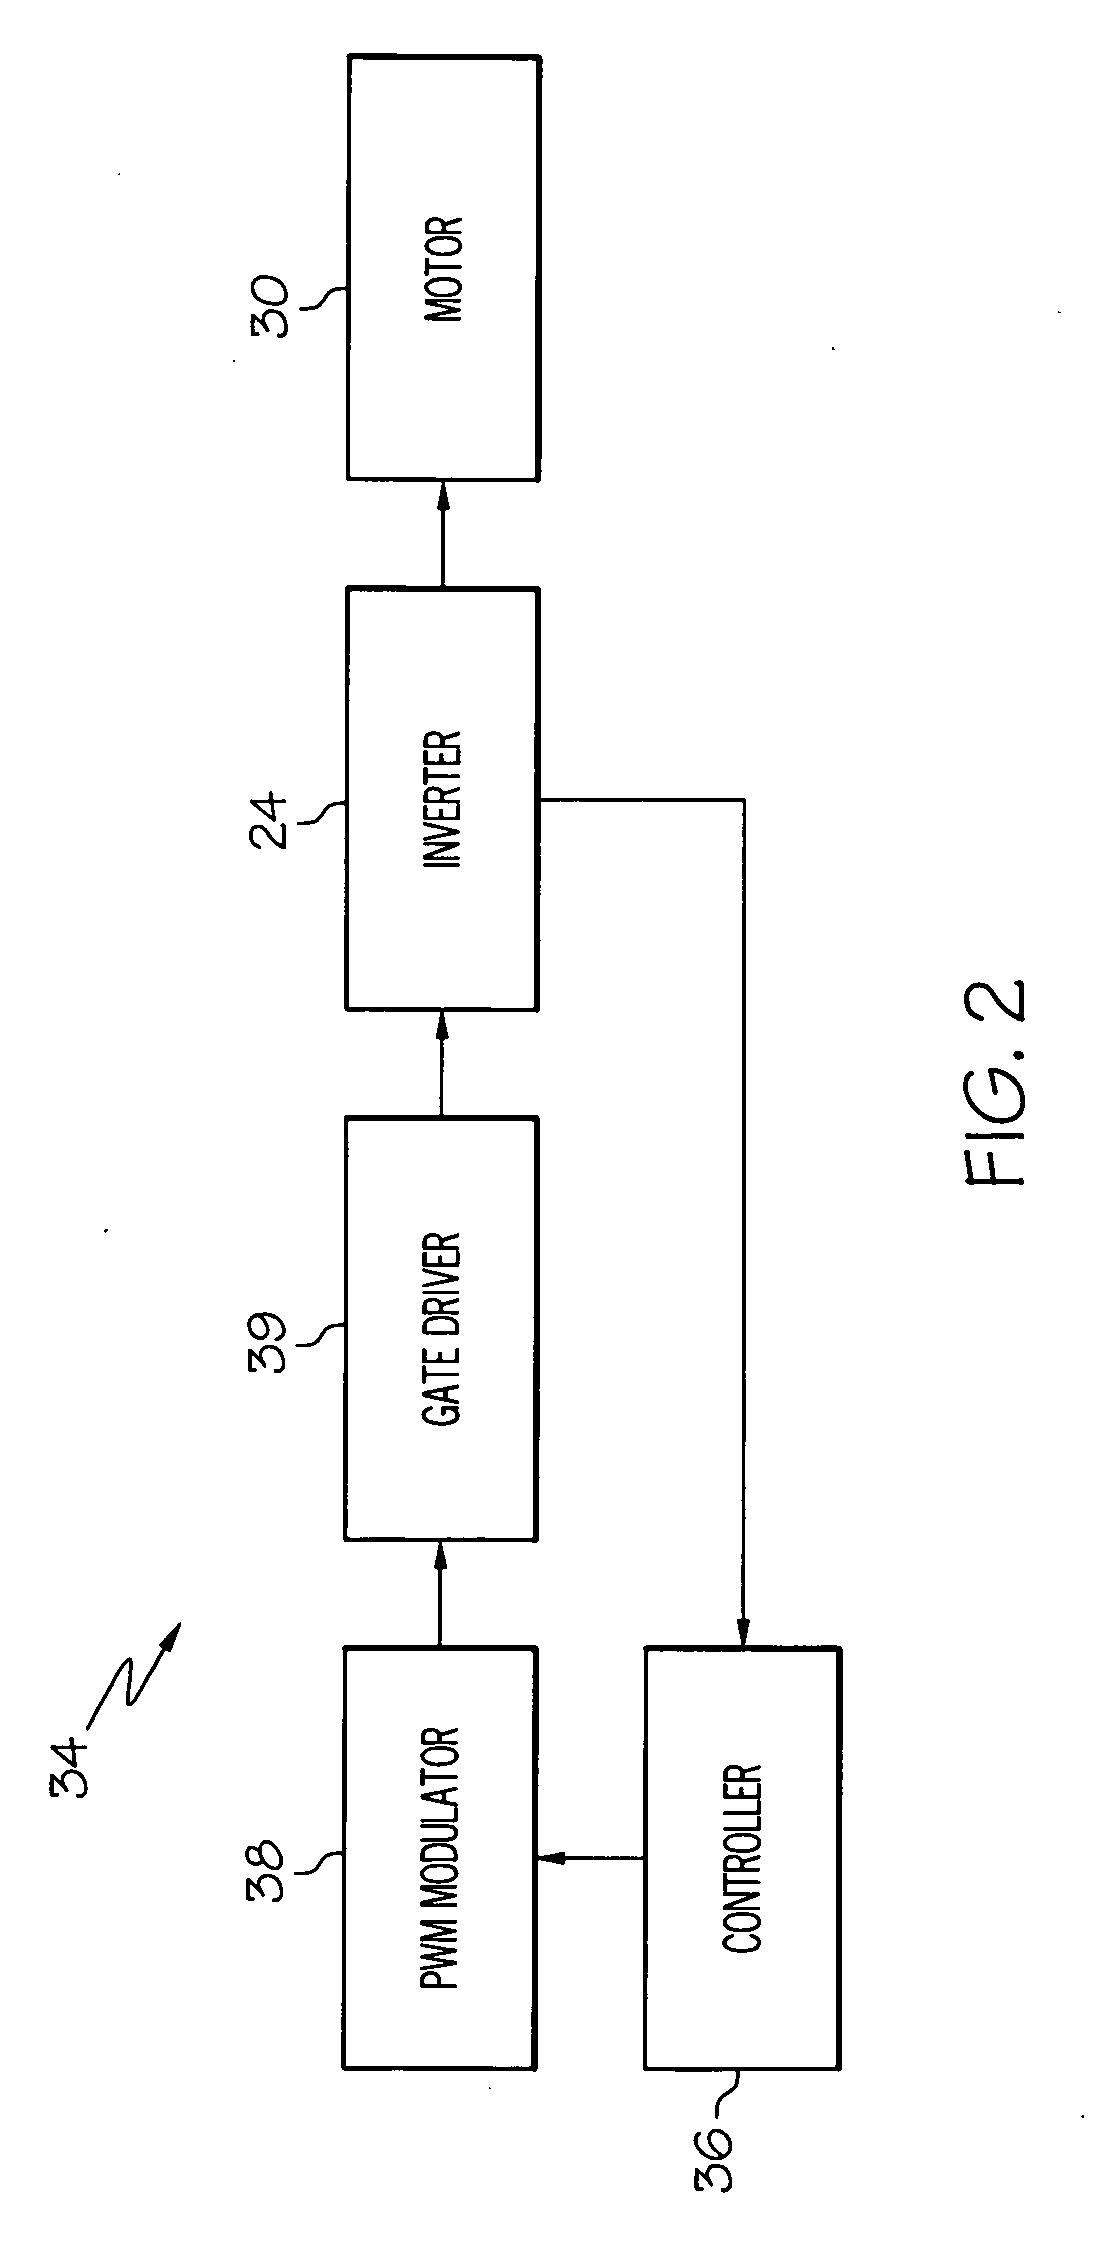 Method and system for creating a vibration in an automobile